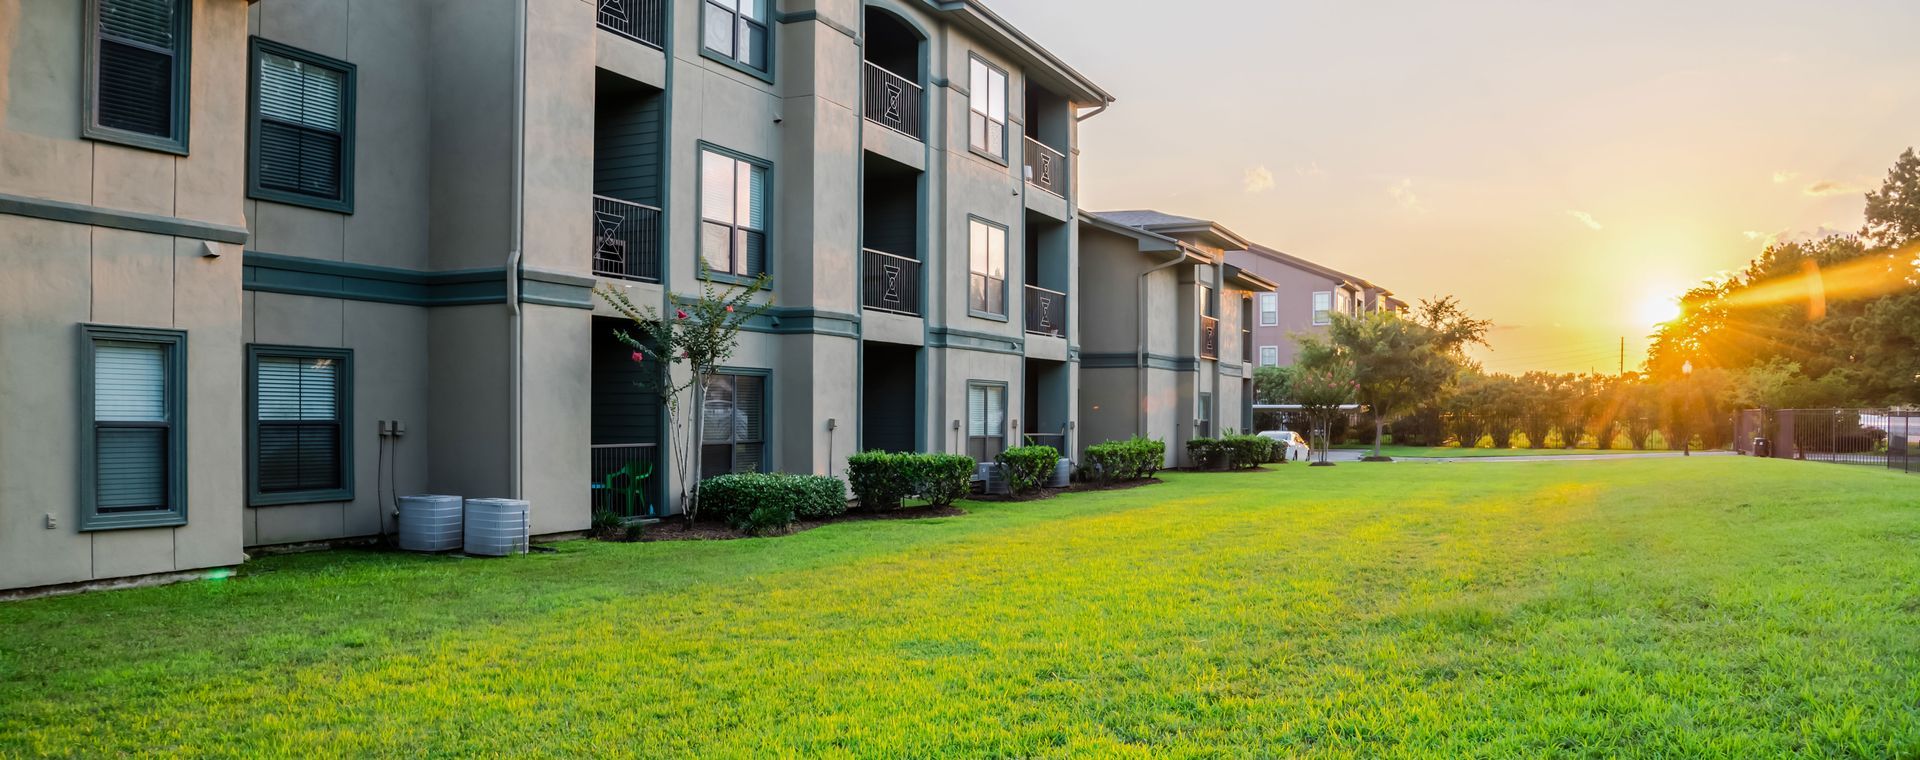 Apartment Complex Remodeling Service in Round Rock, TX